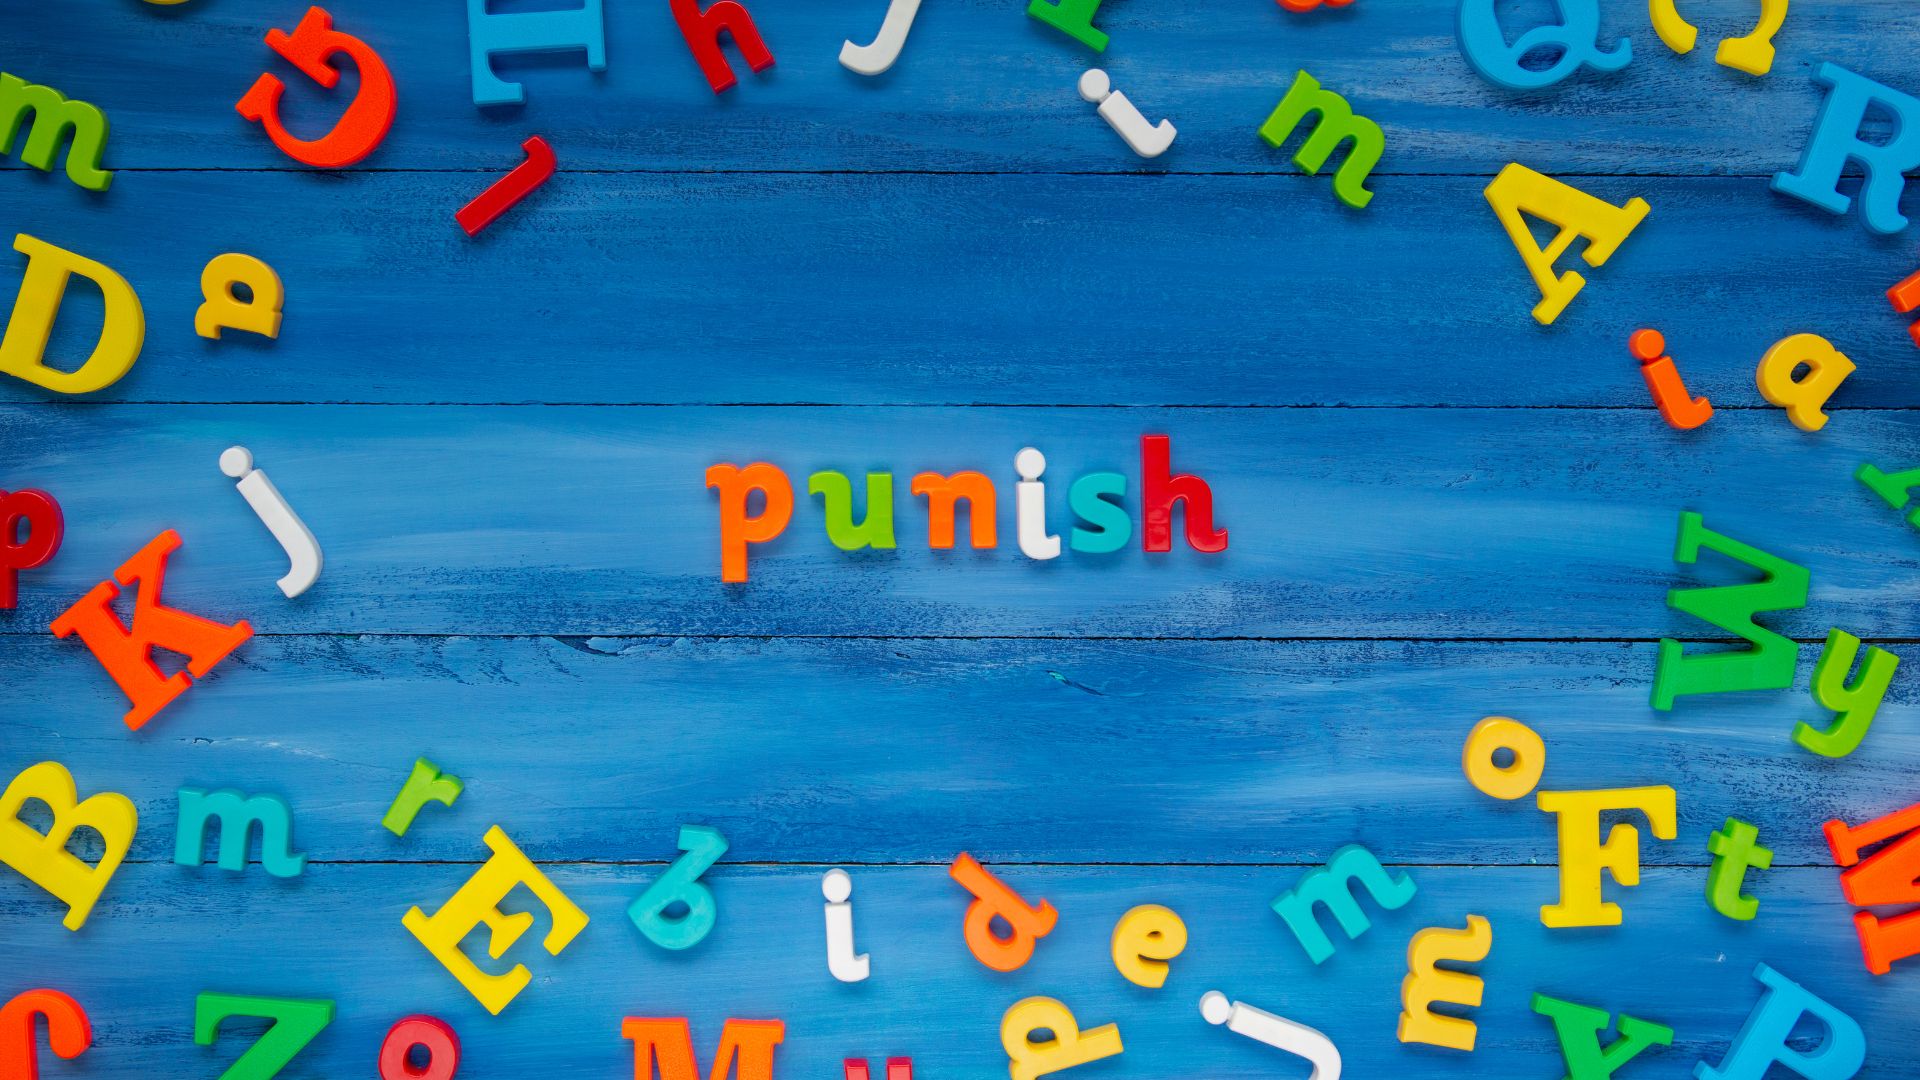 Punish spelled out among many letters, what does it mean to hold someone accountable